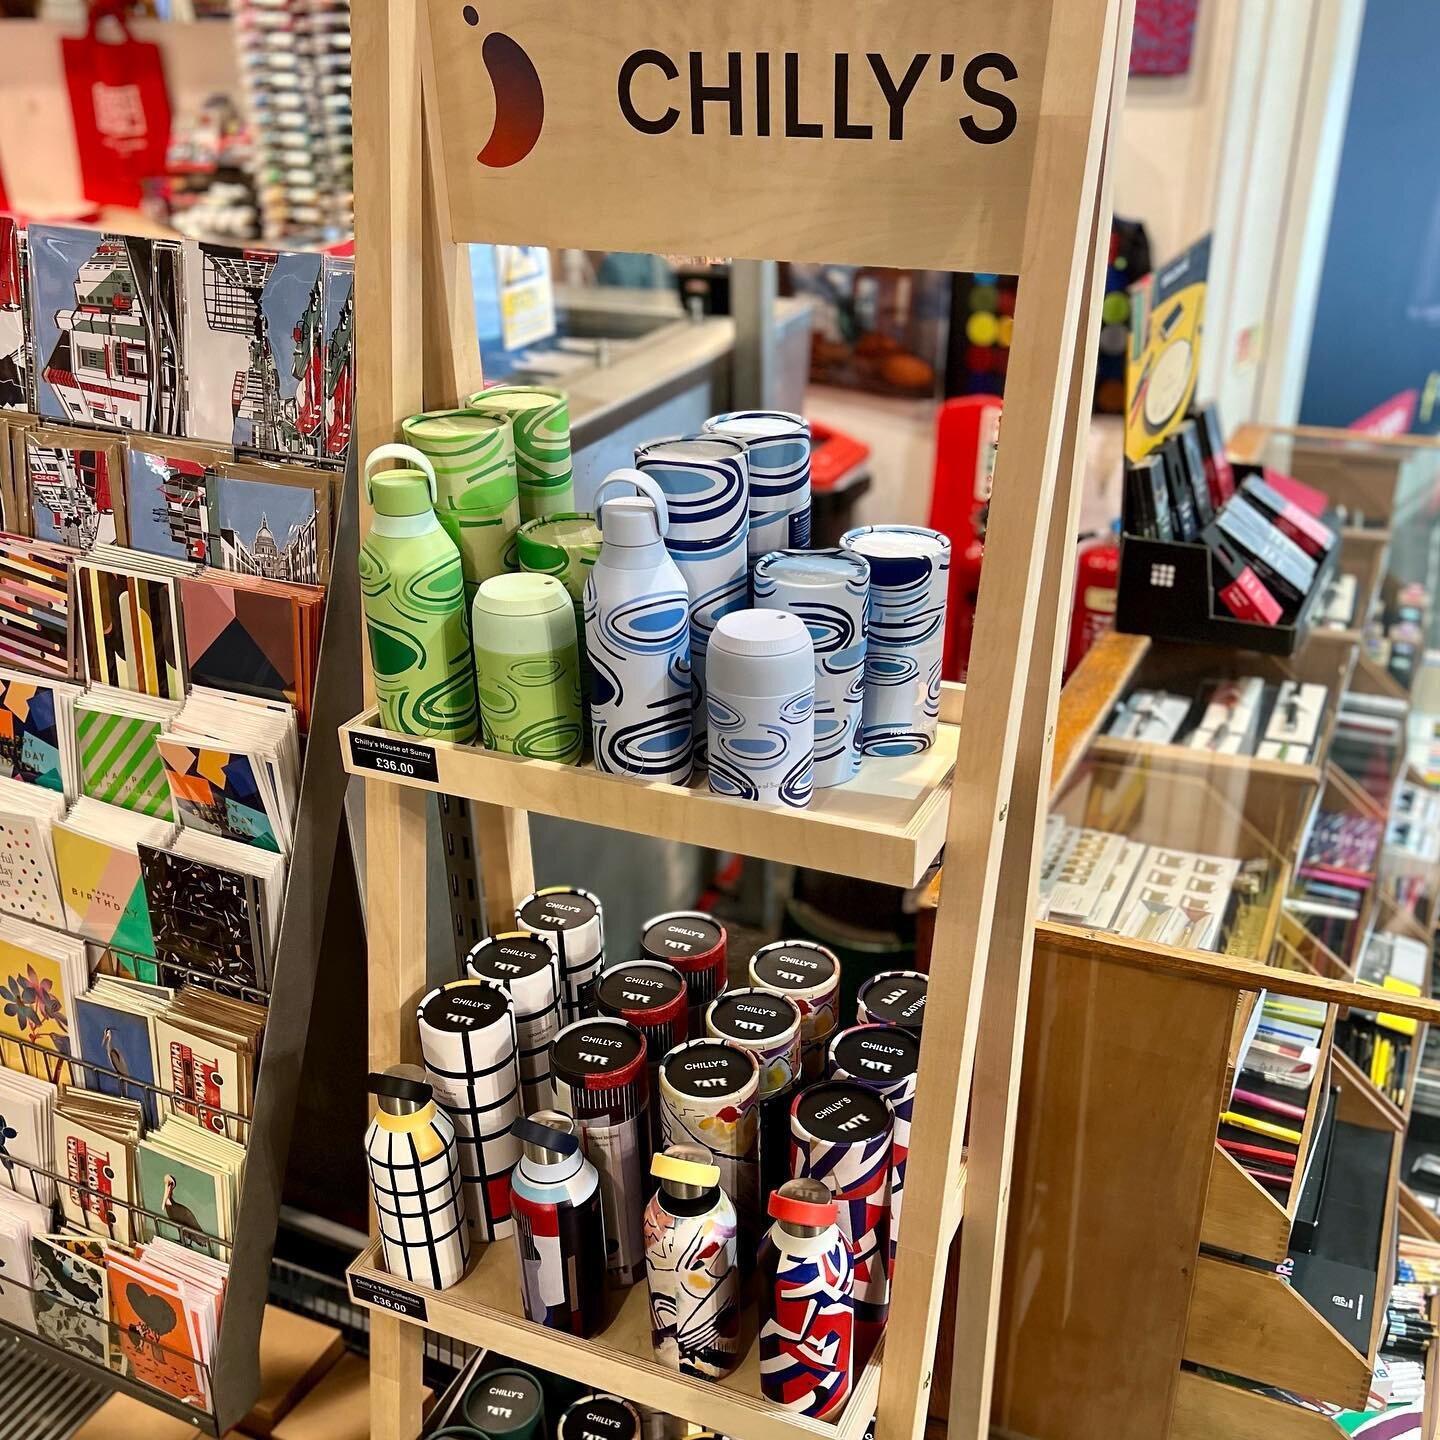 We&rsquo;re excited to introduce a new 🌶 brand to our store! @chillys 💦 Check out these reusable bottles with a selection of stylish designs in store 😍